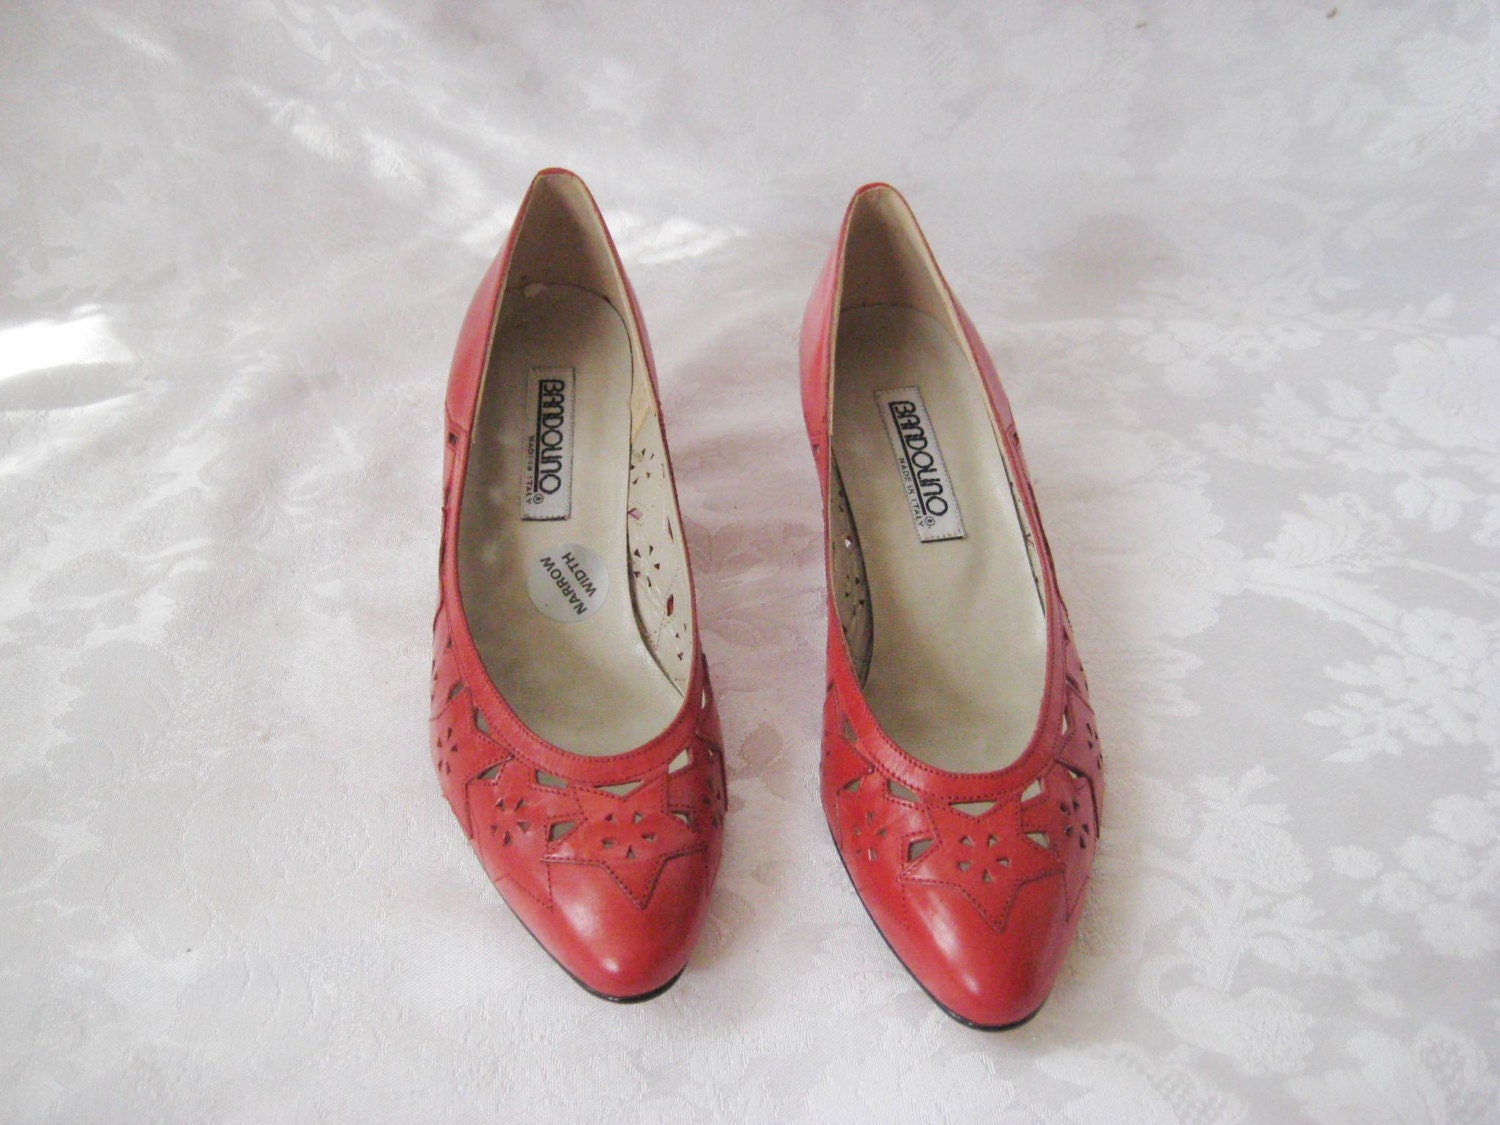 Italian made leather red cut out pumps heels by EndlesslyVintage